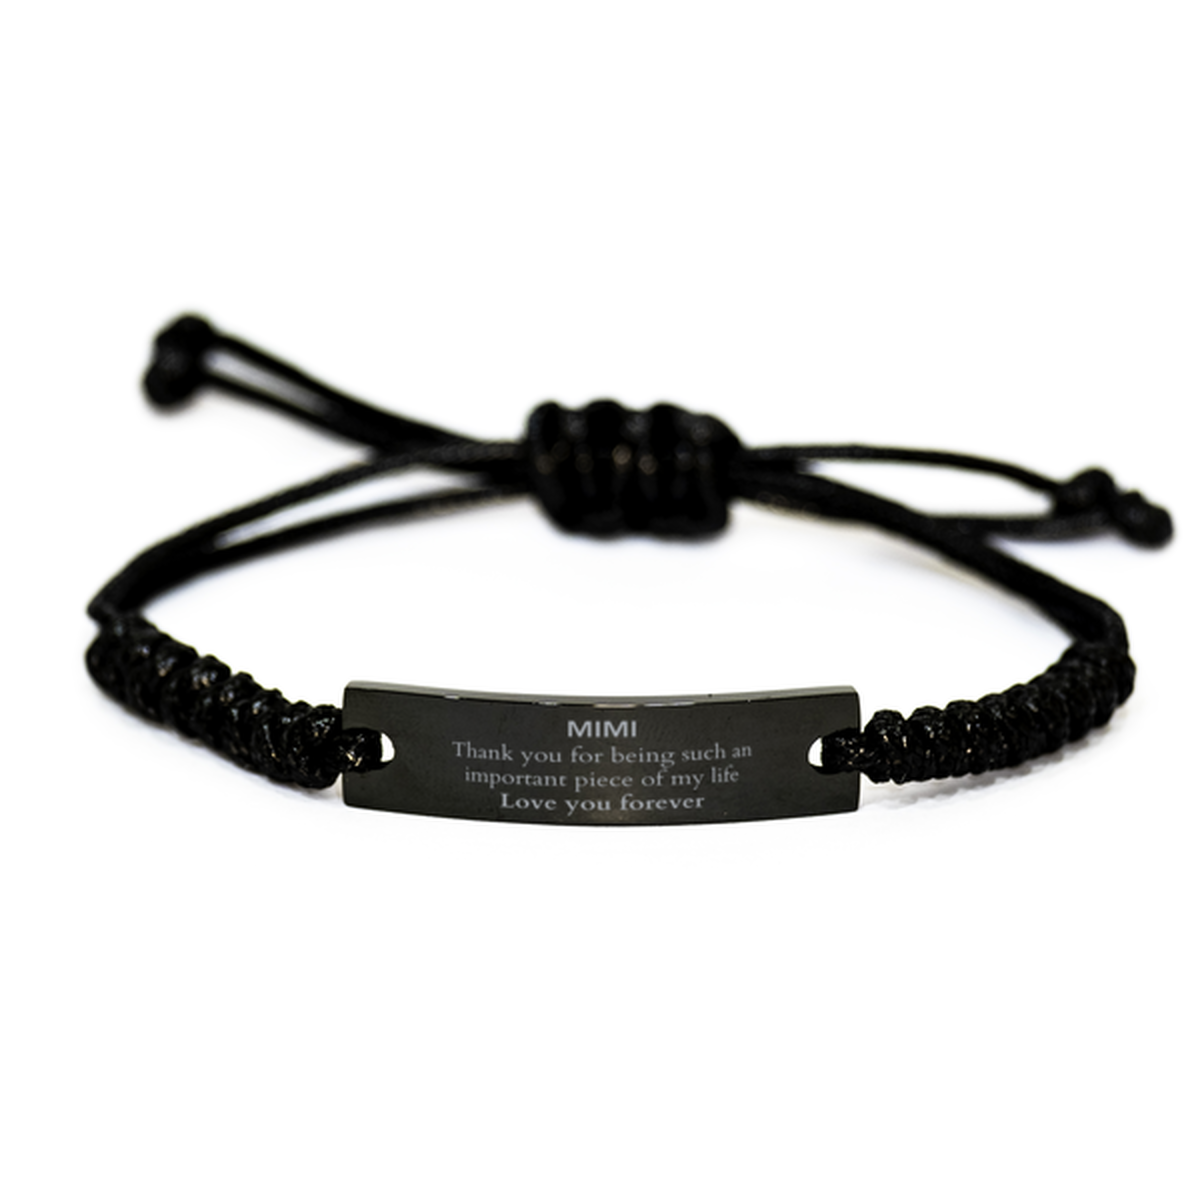 Appropriate Mimi Black Rope Bracelet Epic Birthday Gifts for Mimi Thank you for being such an important piece of my life Mimi Christmas Mothers Fathers Day